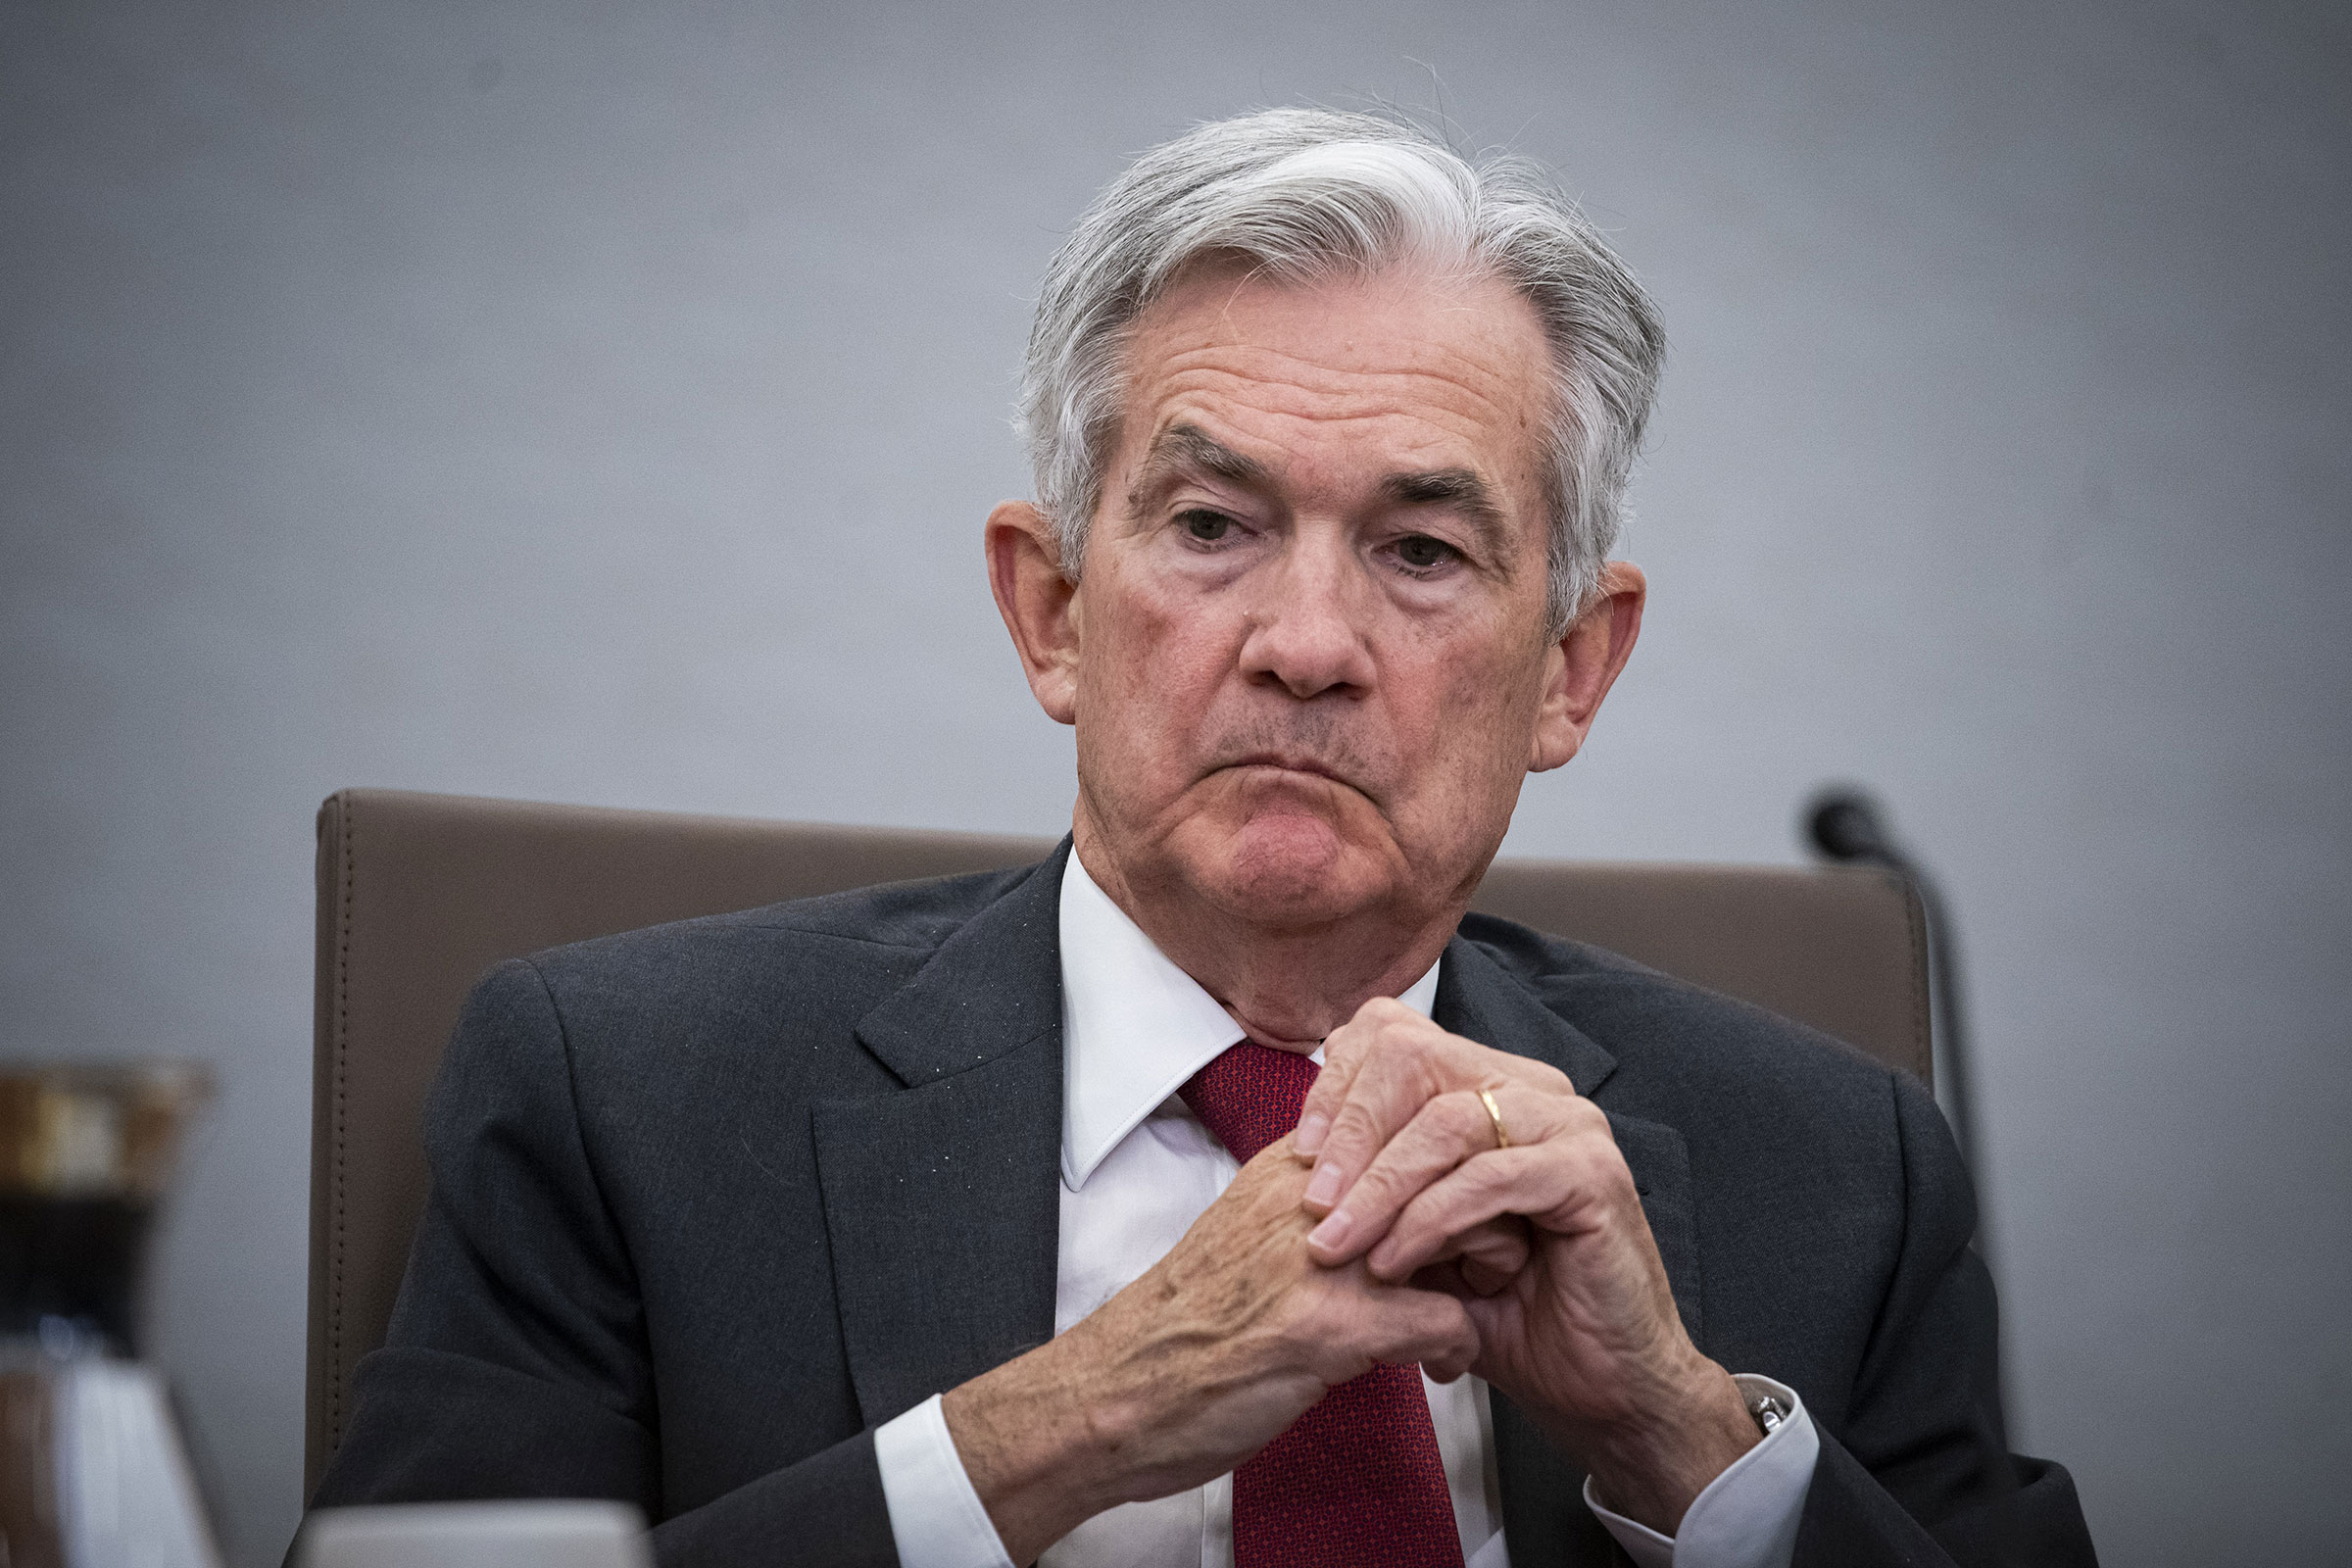 Jerome Powell, chairman of the US Federal Reserve, during a Fed Listens event in Washington, D.C., on Friday, Sept. 23, 2022.